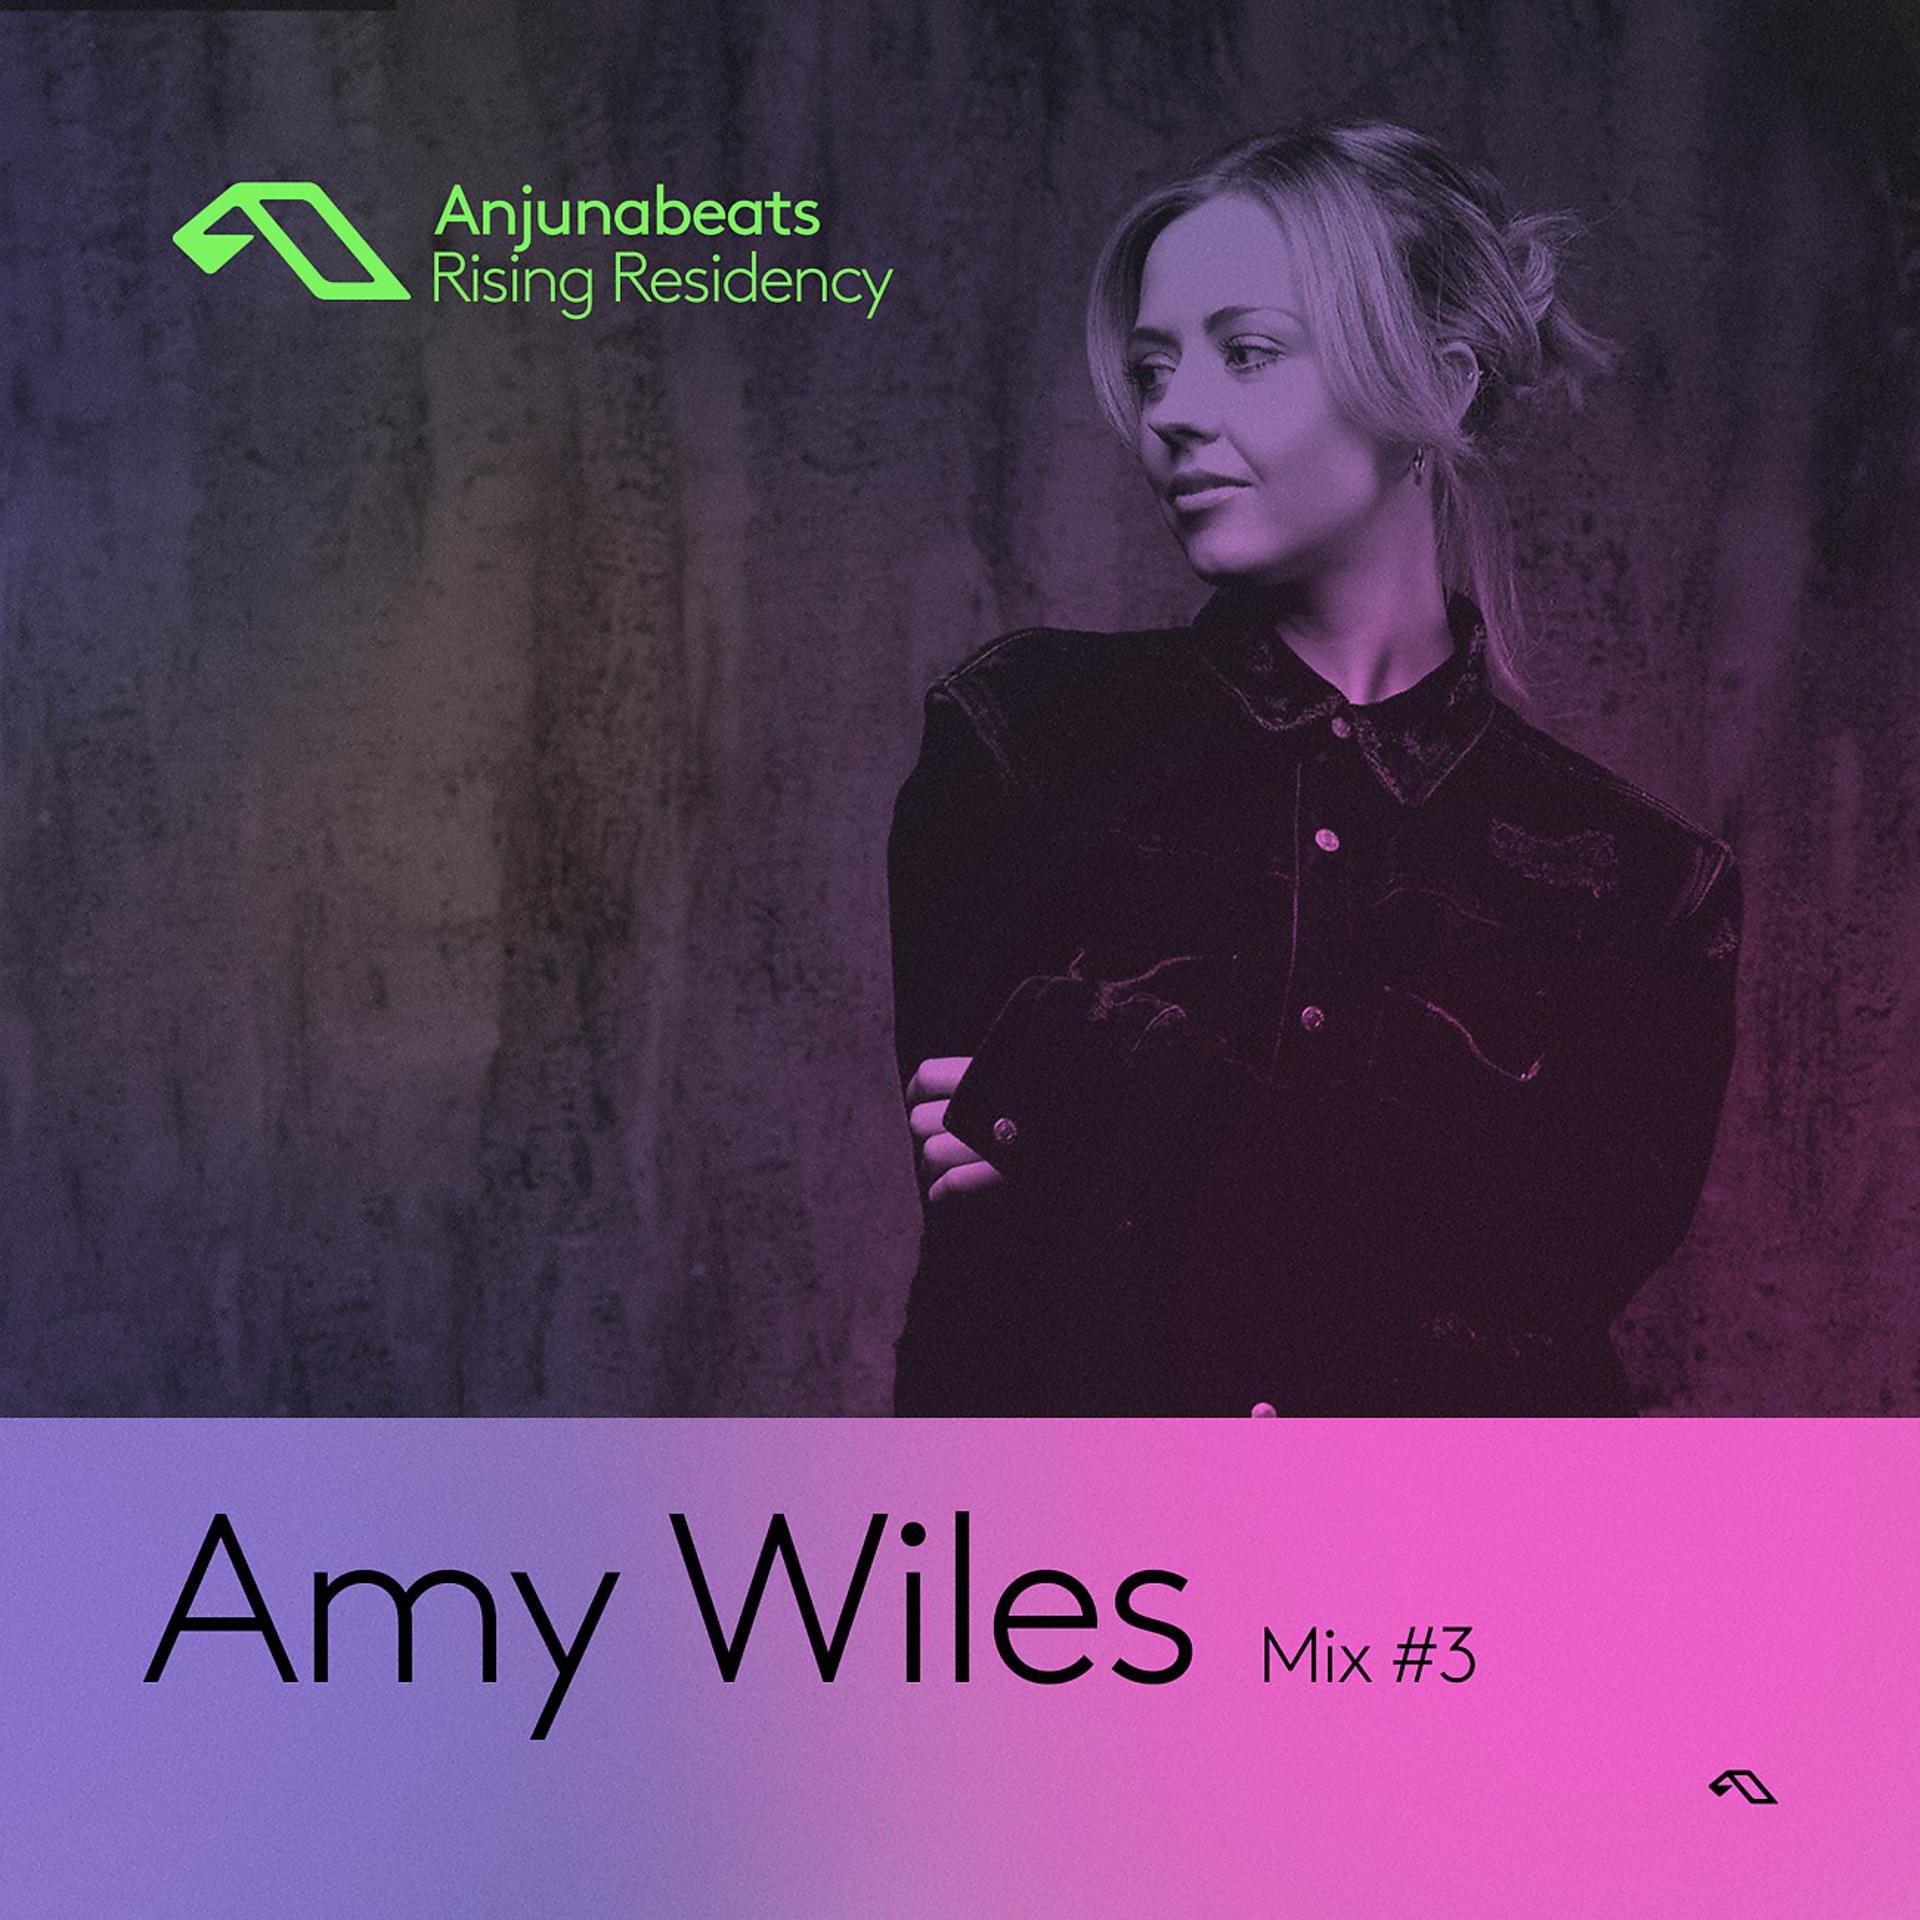 Постер альбома The Anjunabeats Rising Residency with Amy Wiles #3